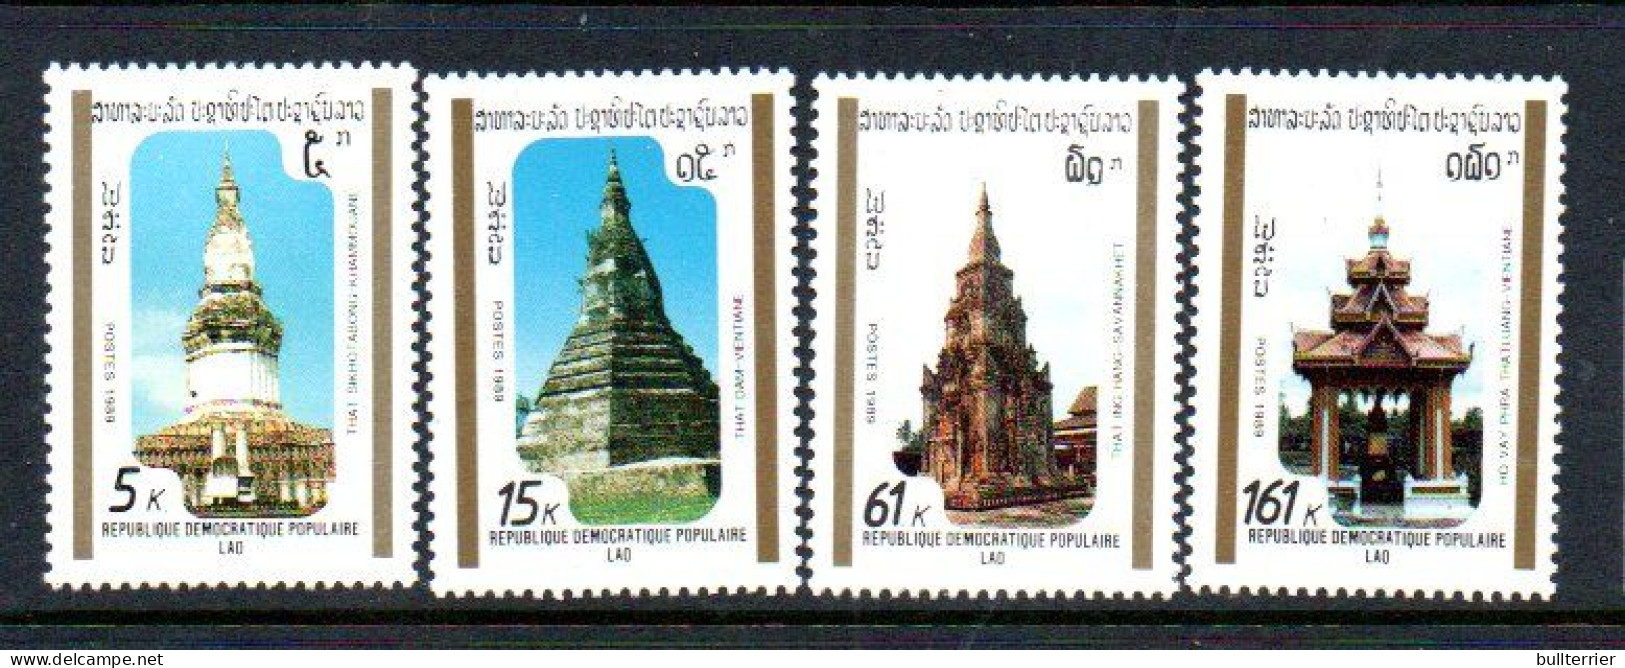 LAOS - 1989 - TEMPLES SET OF 4  MINT NEVER HINGED - Laos